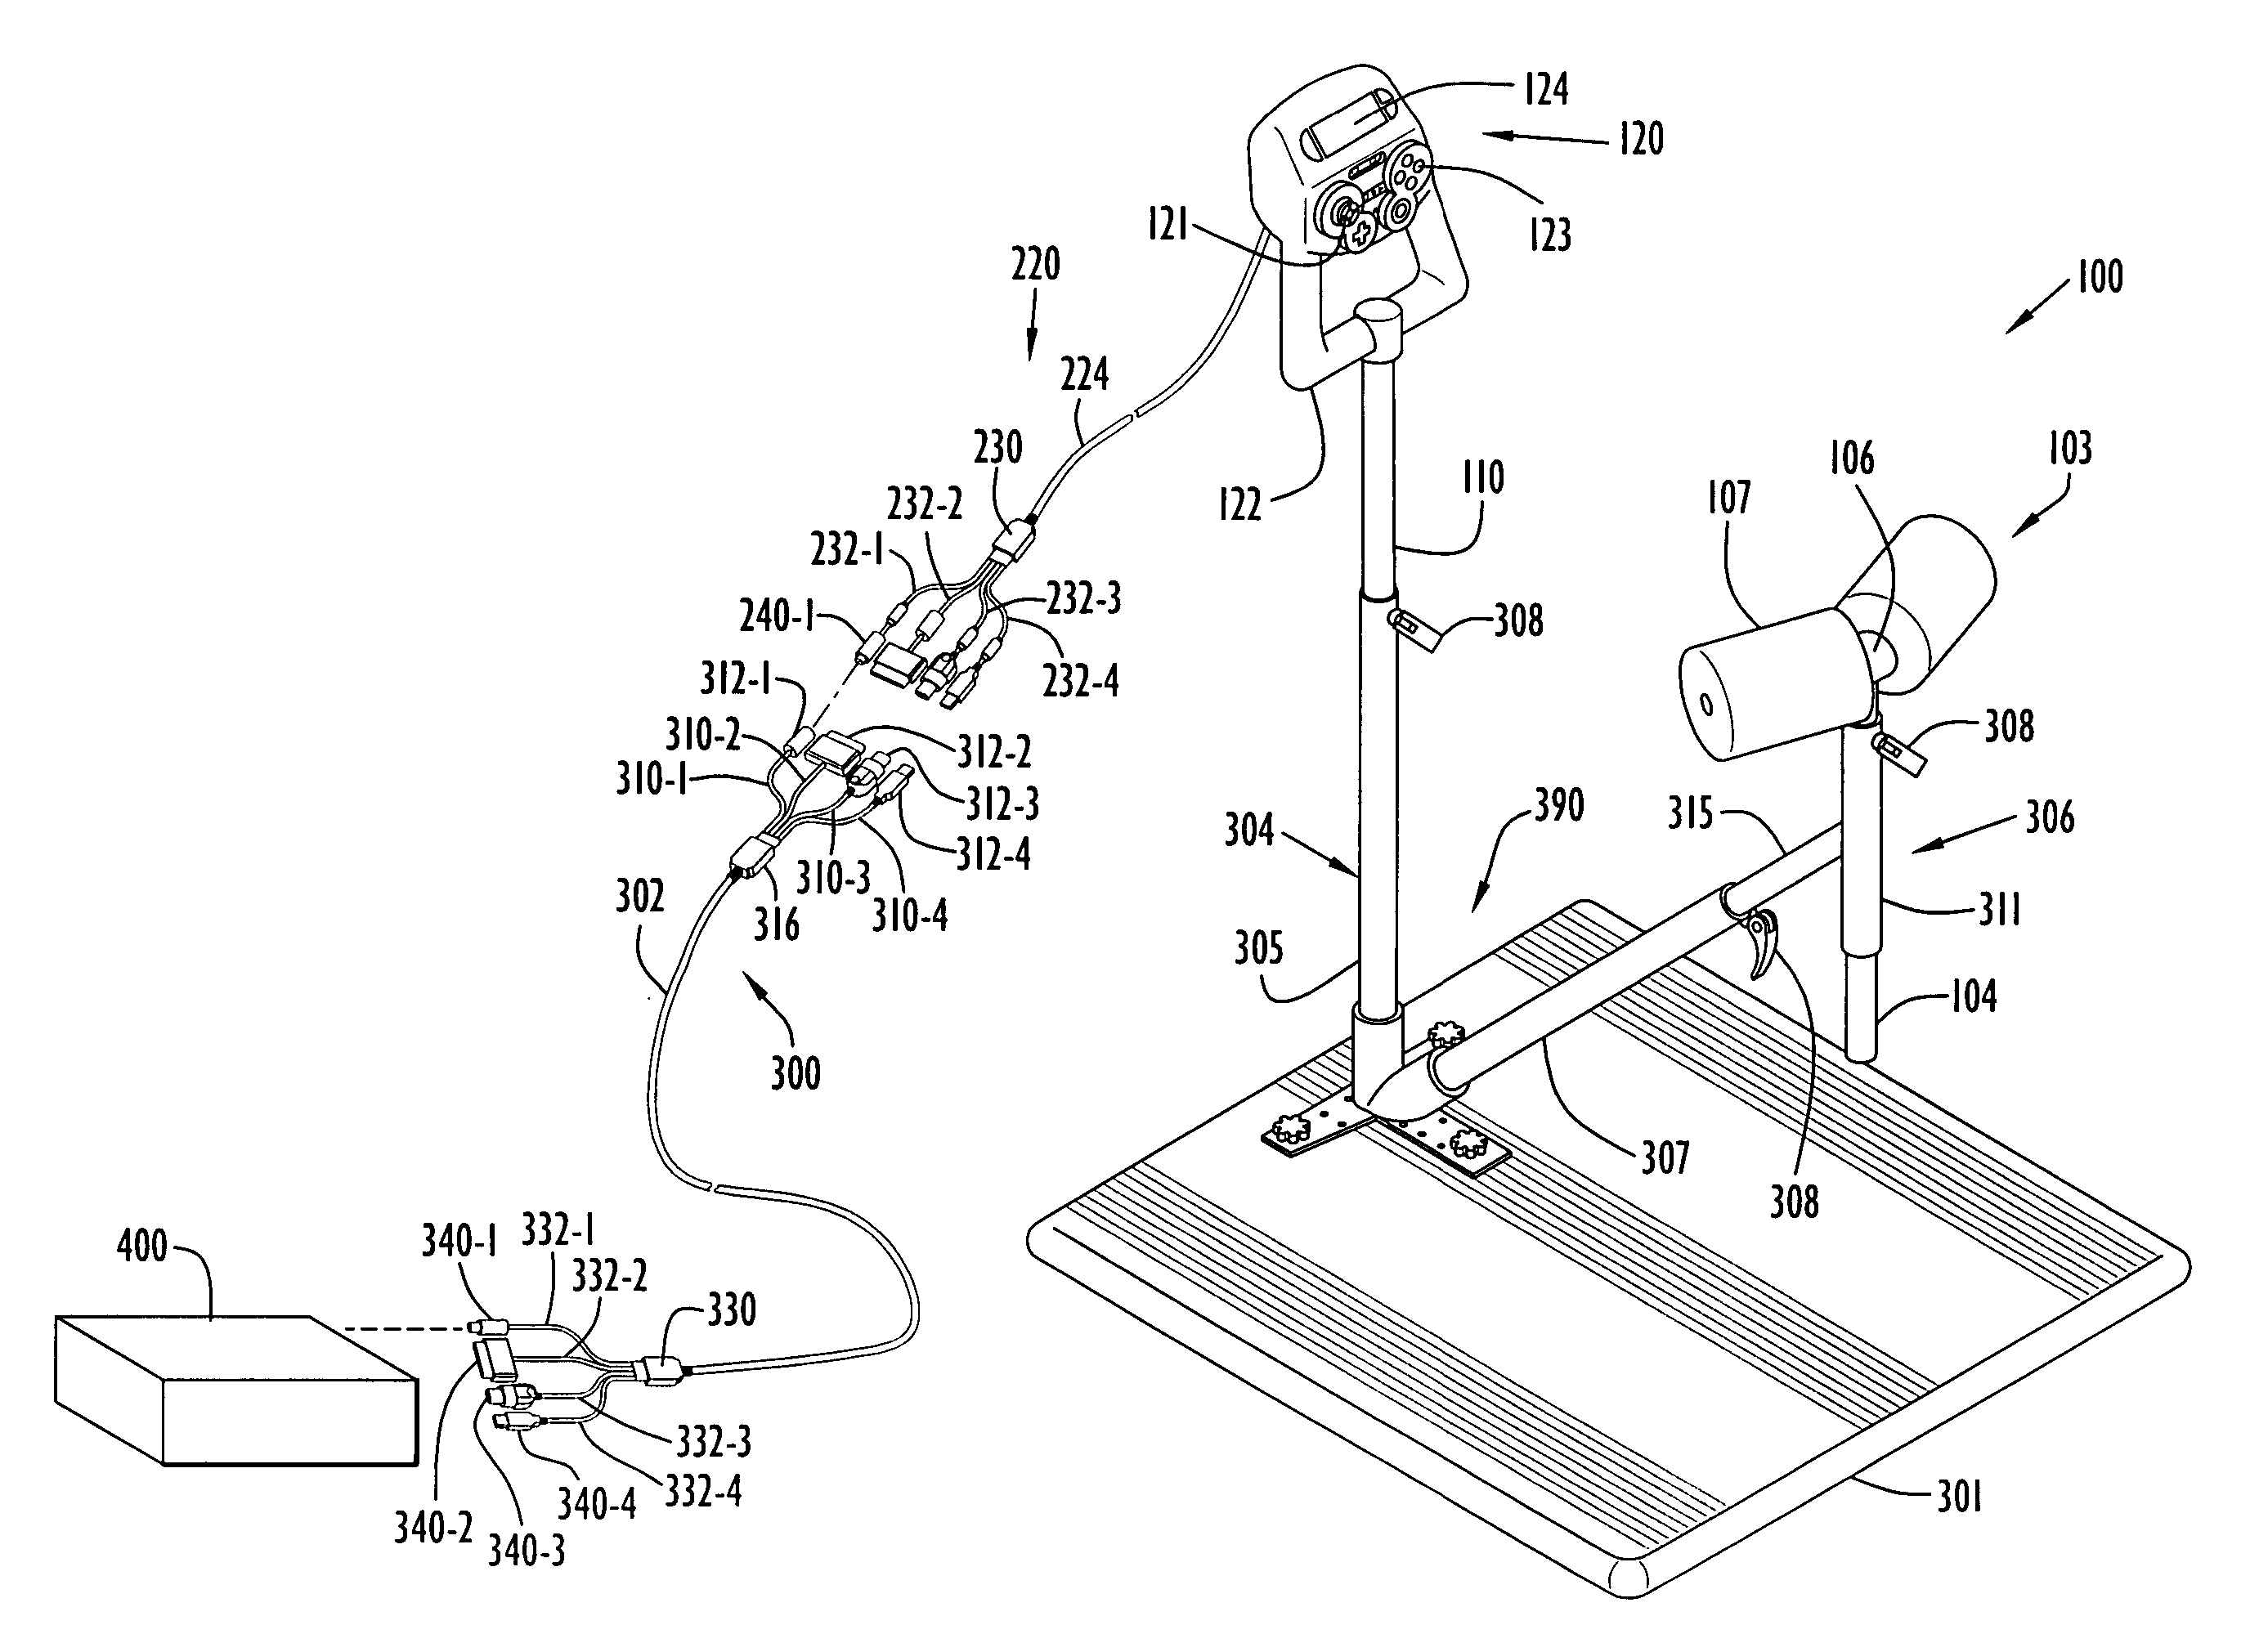 Game controller connection system and method of selectively connecting a game controller with a plurality of different video gaming systems